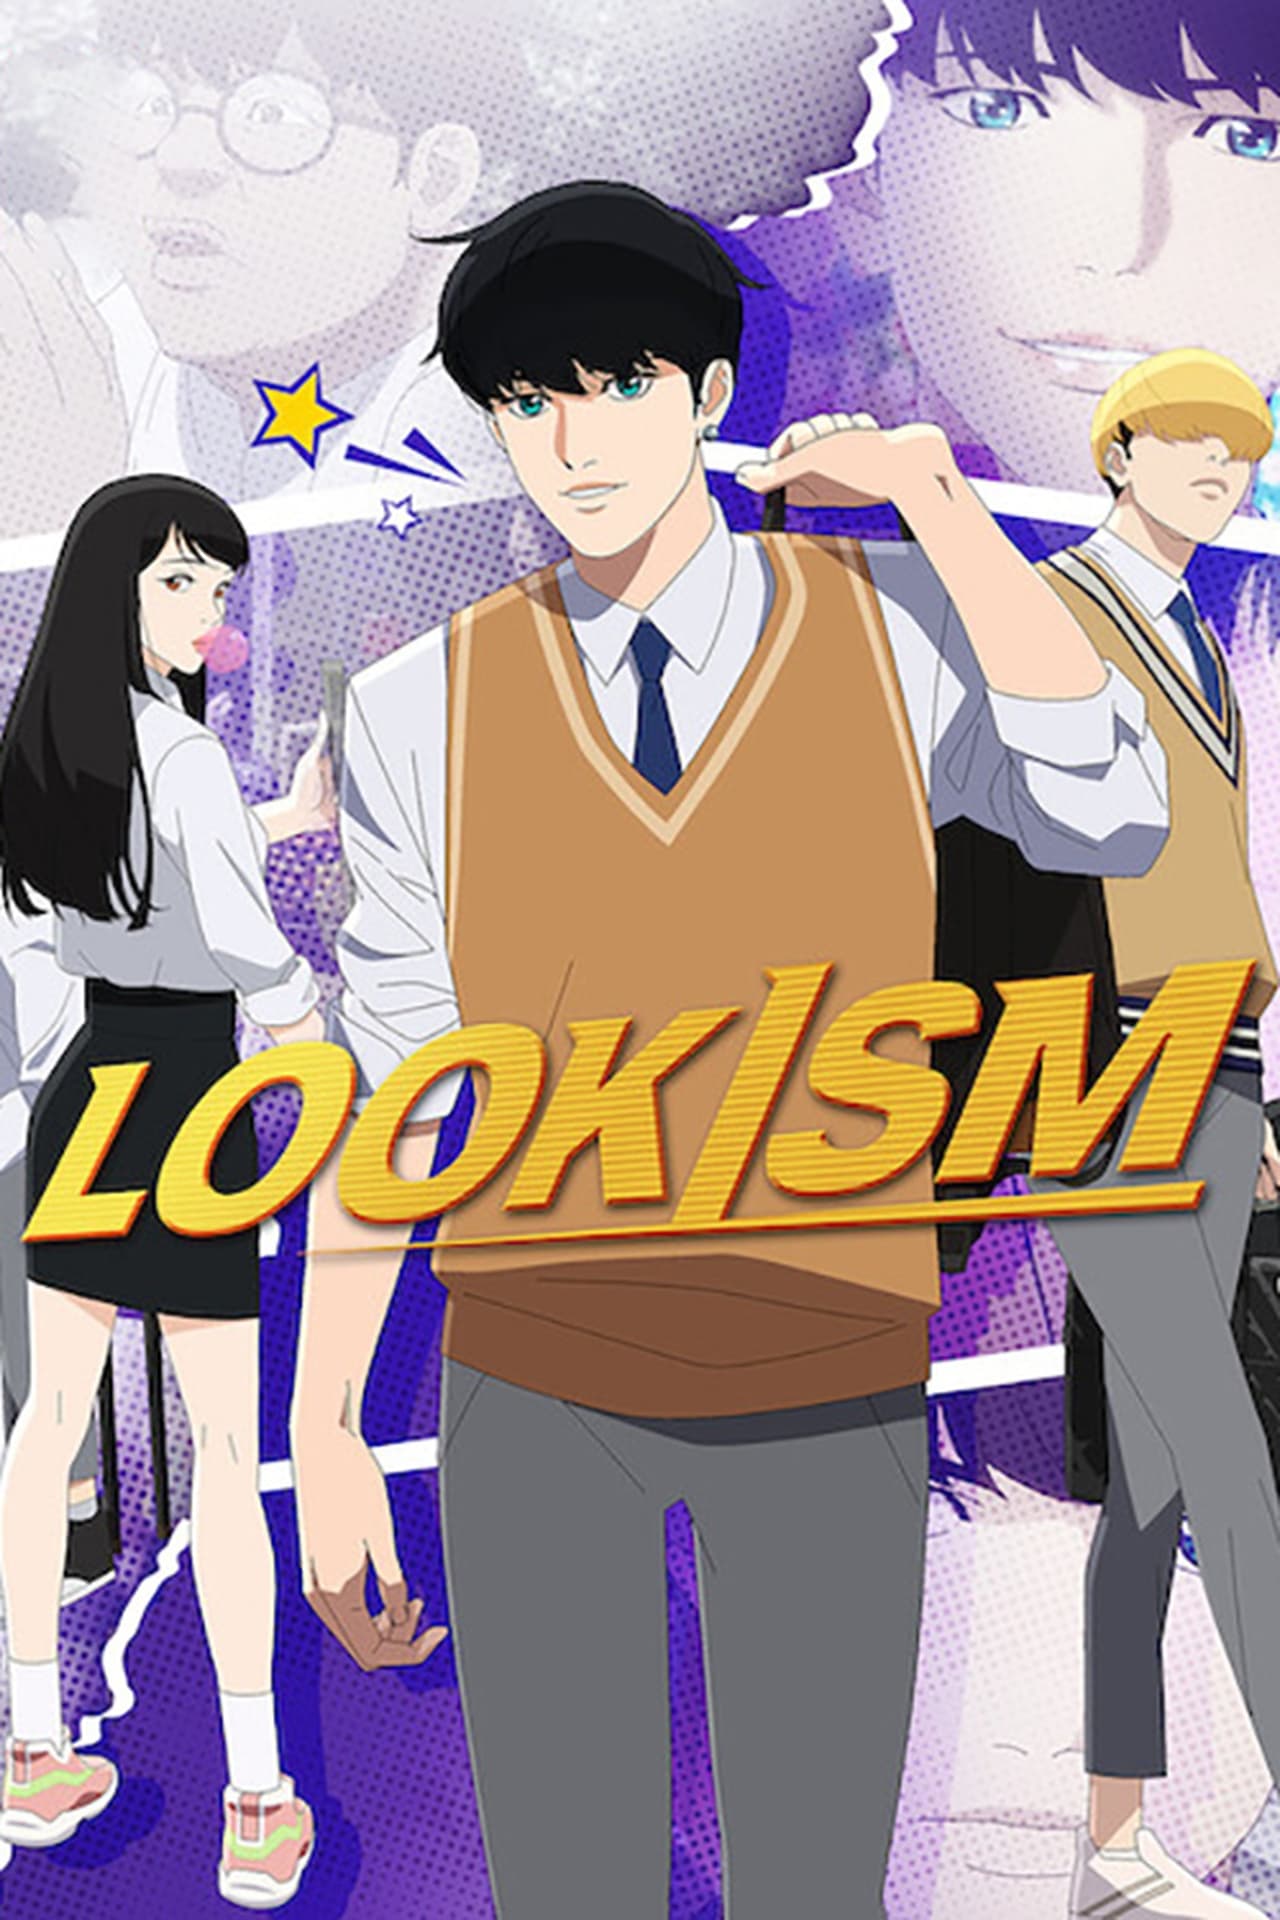 Read more about the article Lookism S01 (Complete) | Anime TV Series